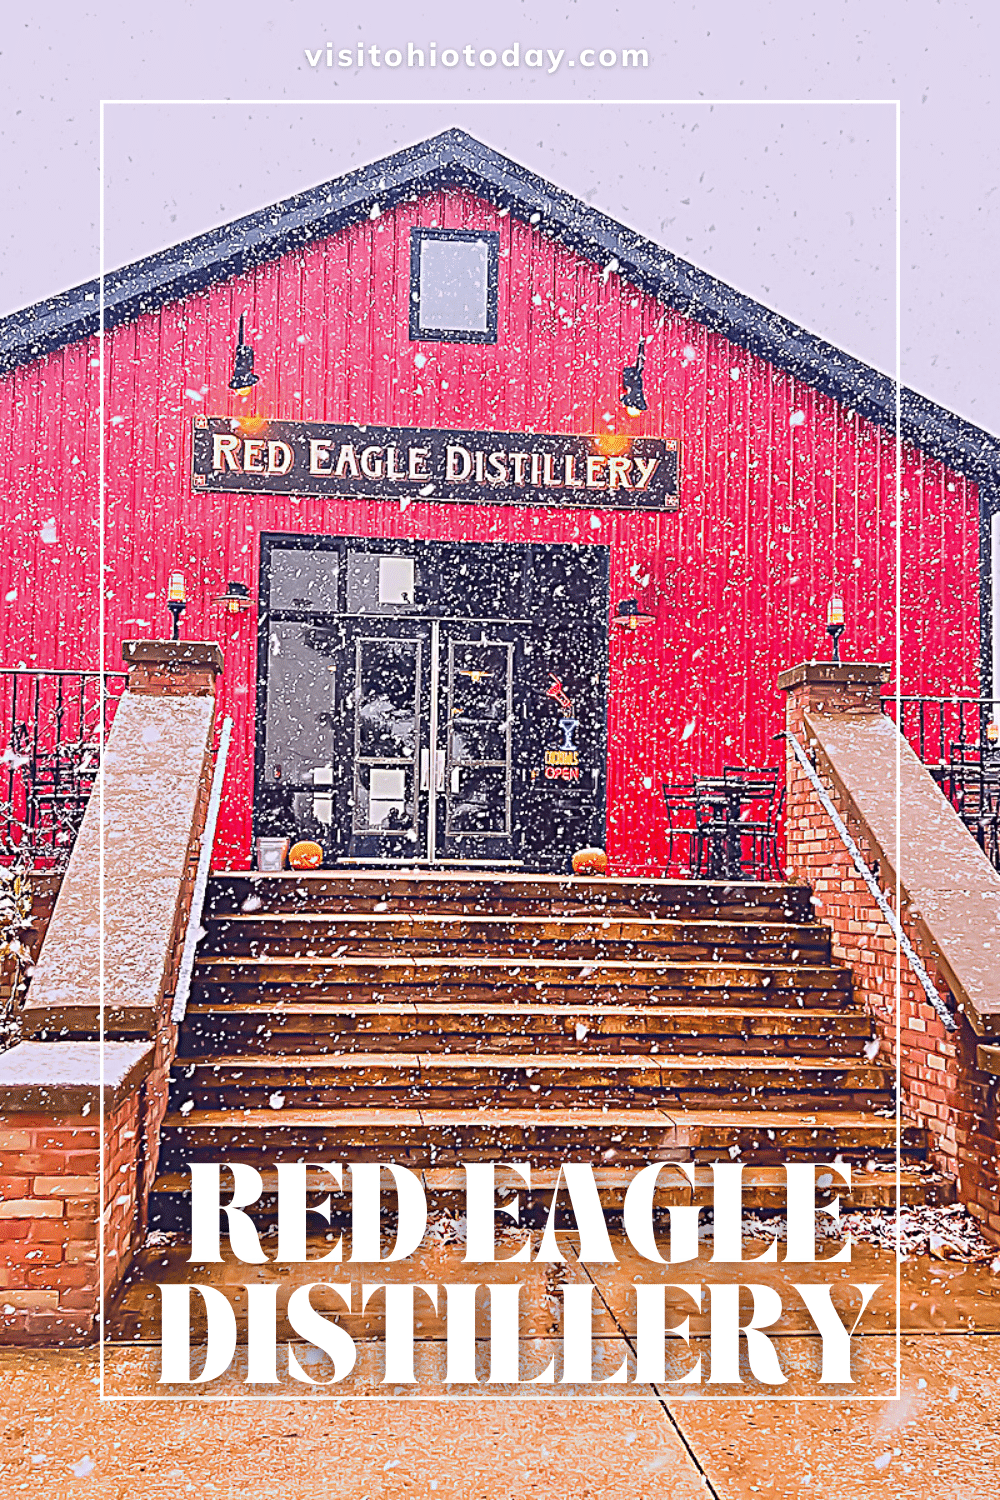 red eagle distillery in back ground with text overlay saying red eagle distillery